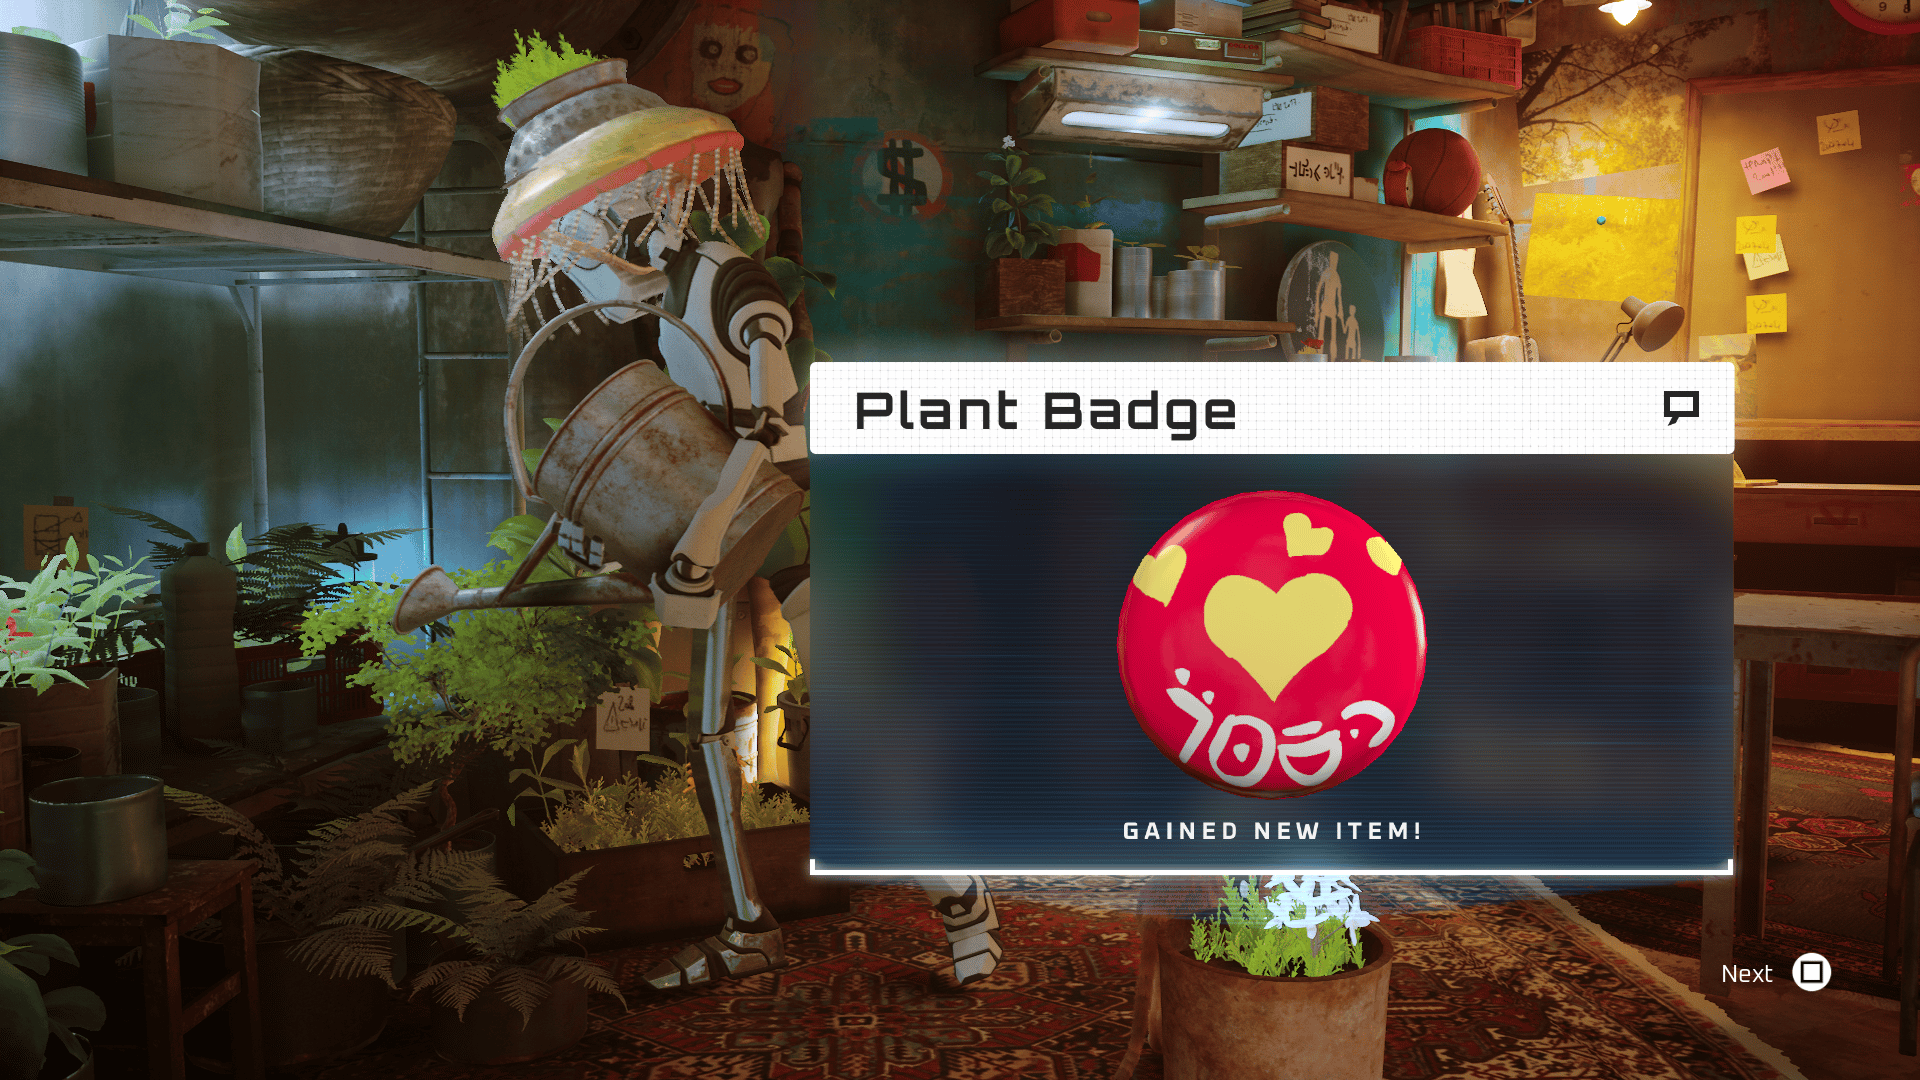 You can get the Plant Badge by collecting all the Plants